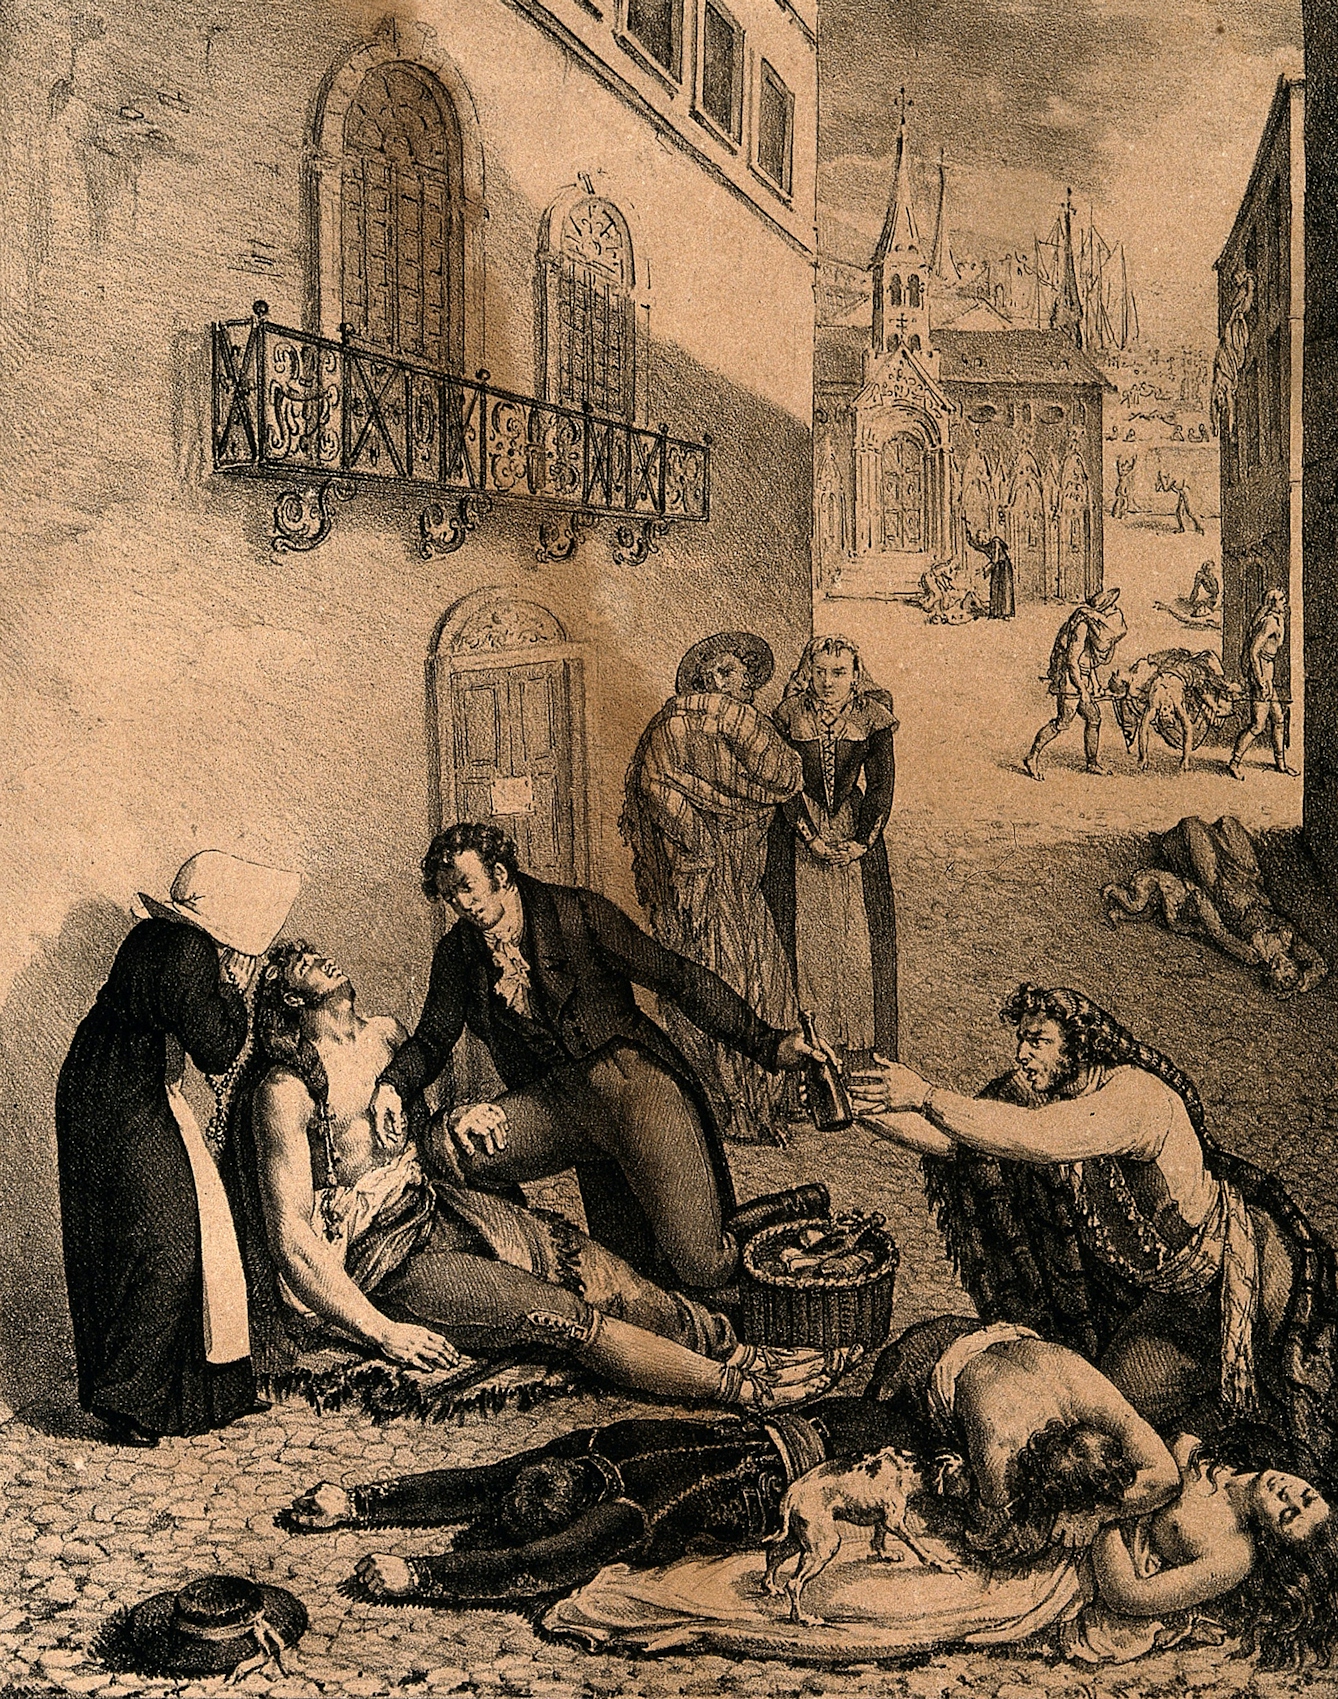 V0010539 André Mazet tending people suffering from yellow fever in the streets of Barcelona